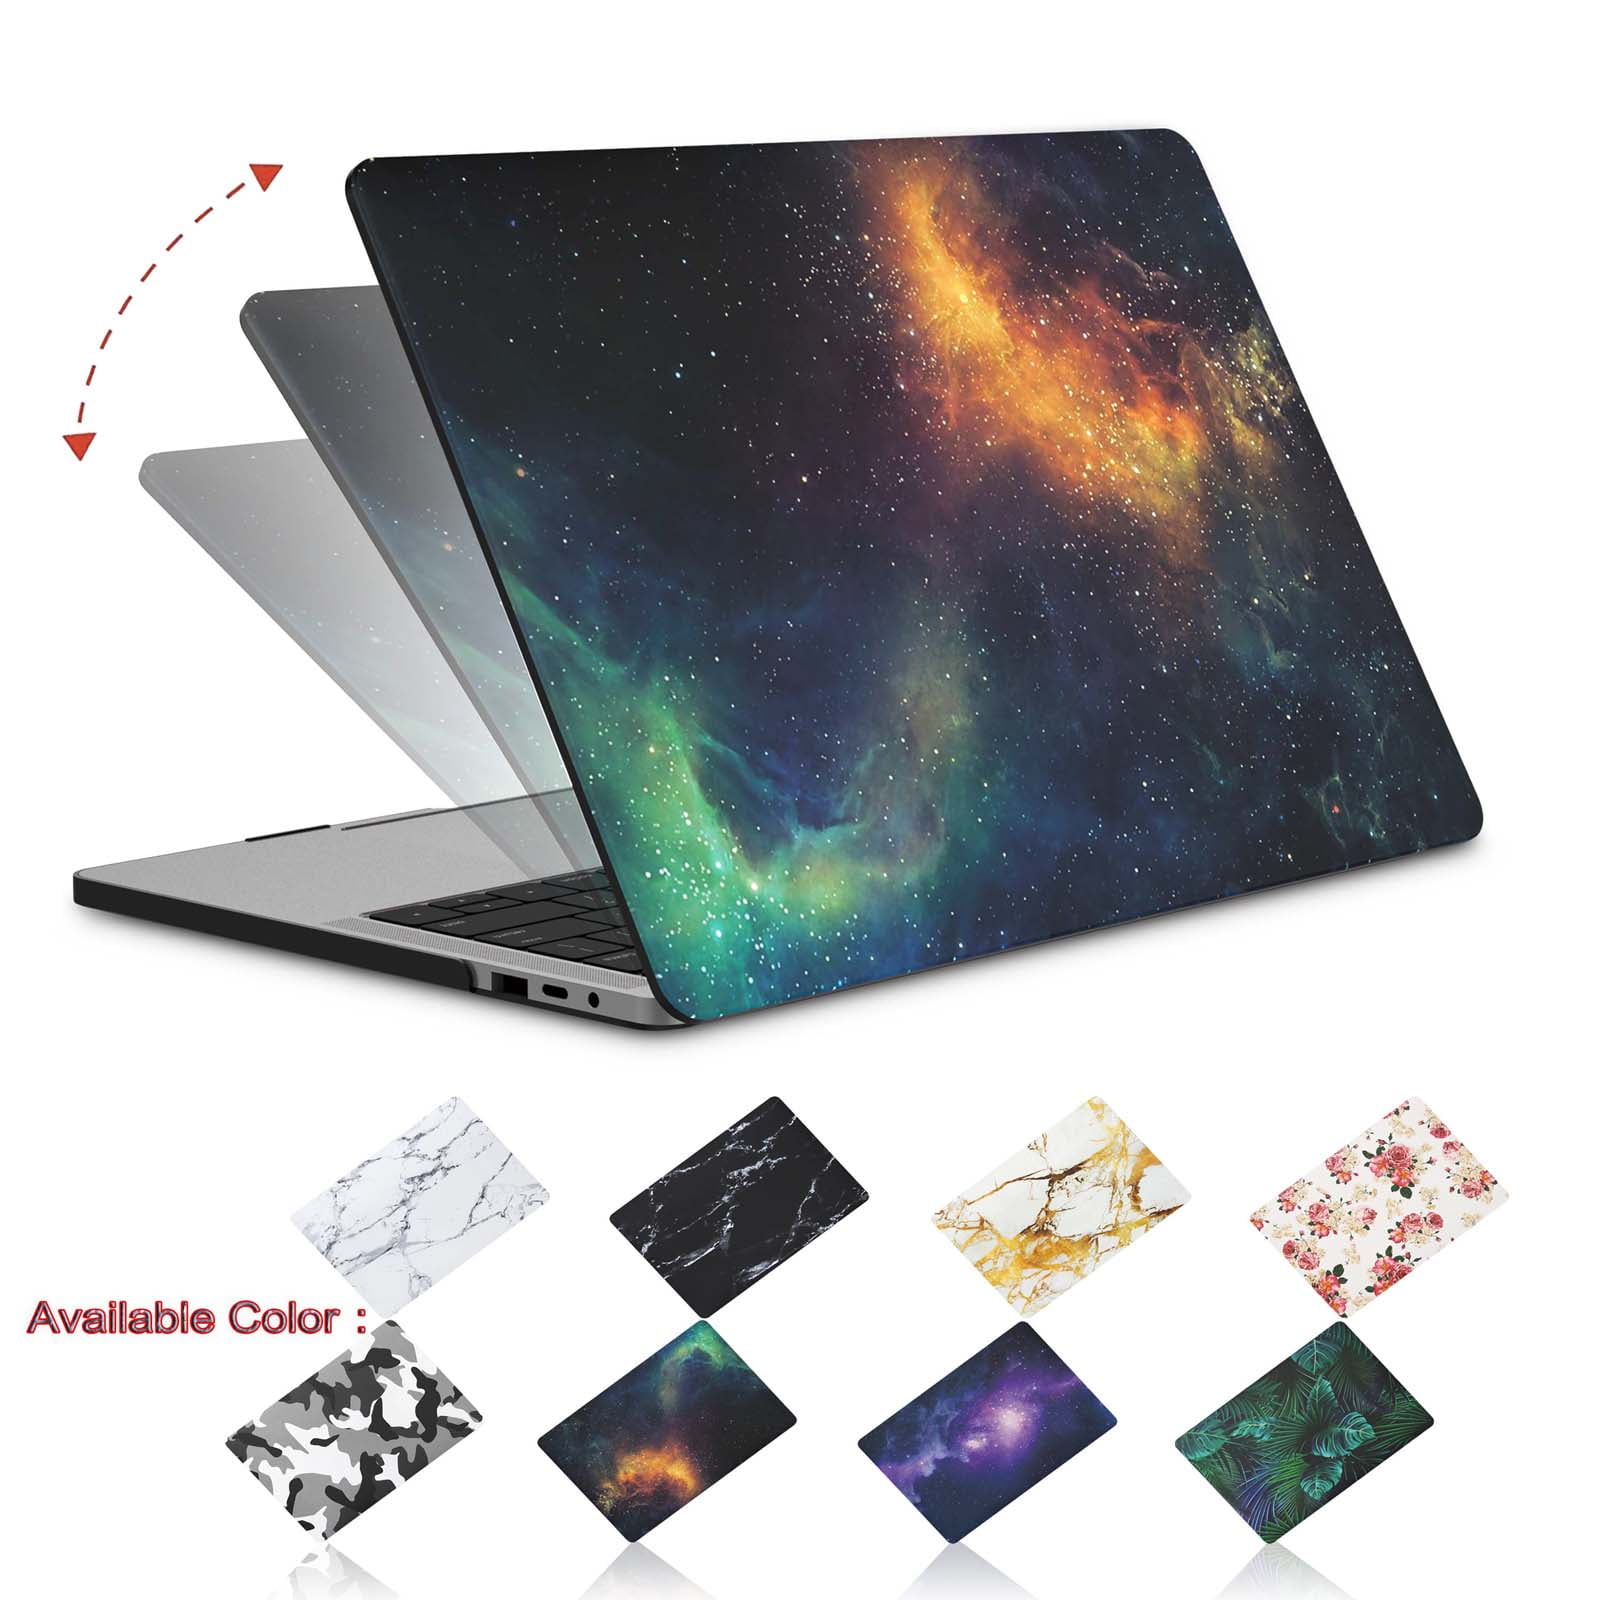 Unique Custom Shining Gemstone Diamond Print Girls Laptop Sleeve Soft Laptop Sleeve Protector Briefcase Protective for MacBook Air 11